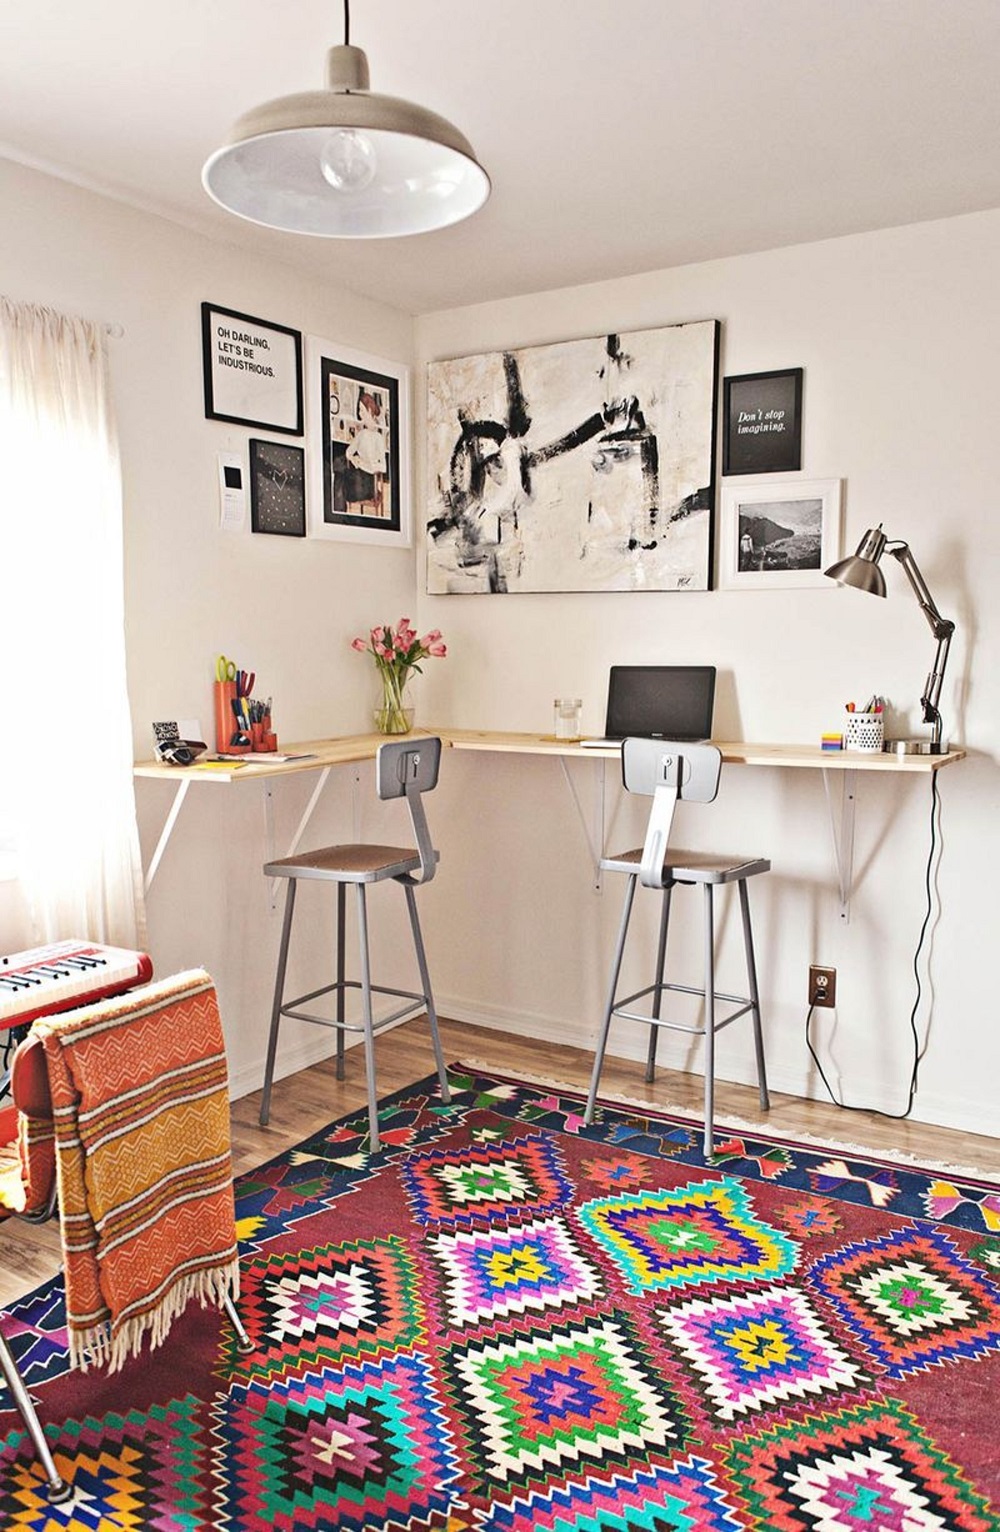 dk11 How to build your own desk with these DIY desk ideas